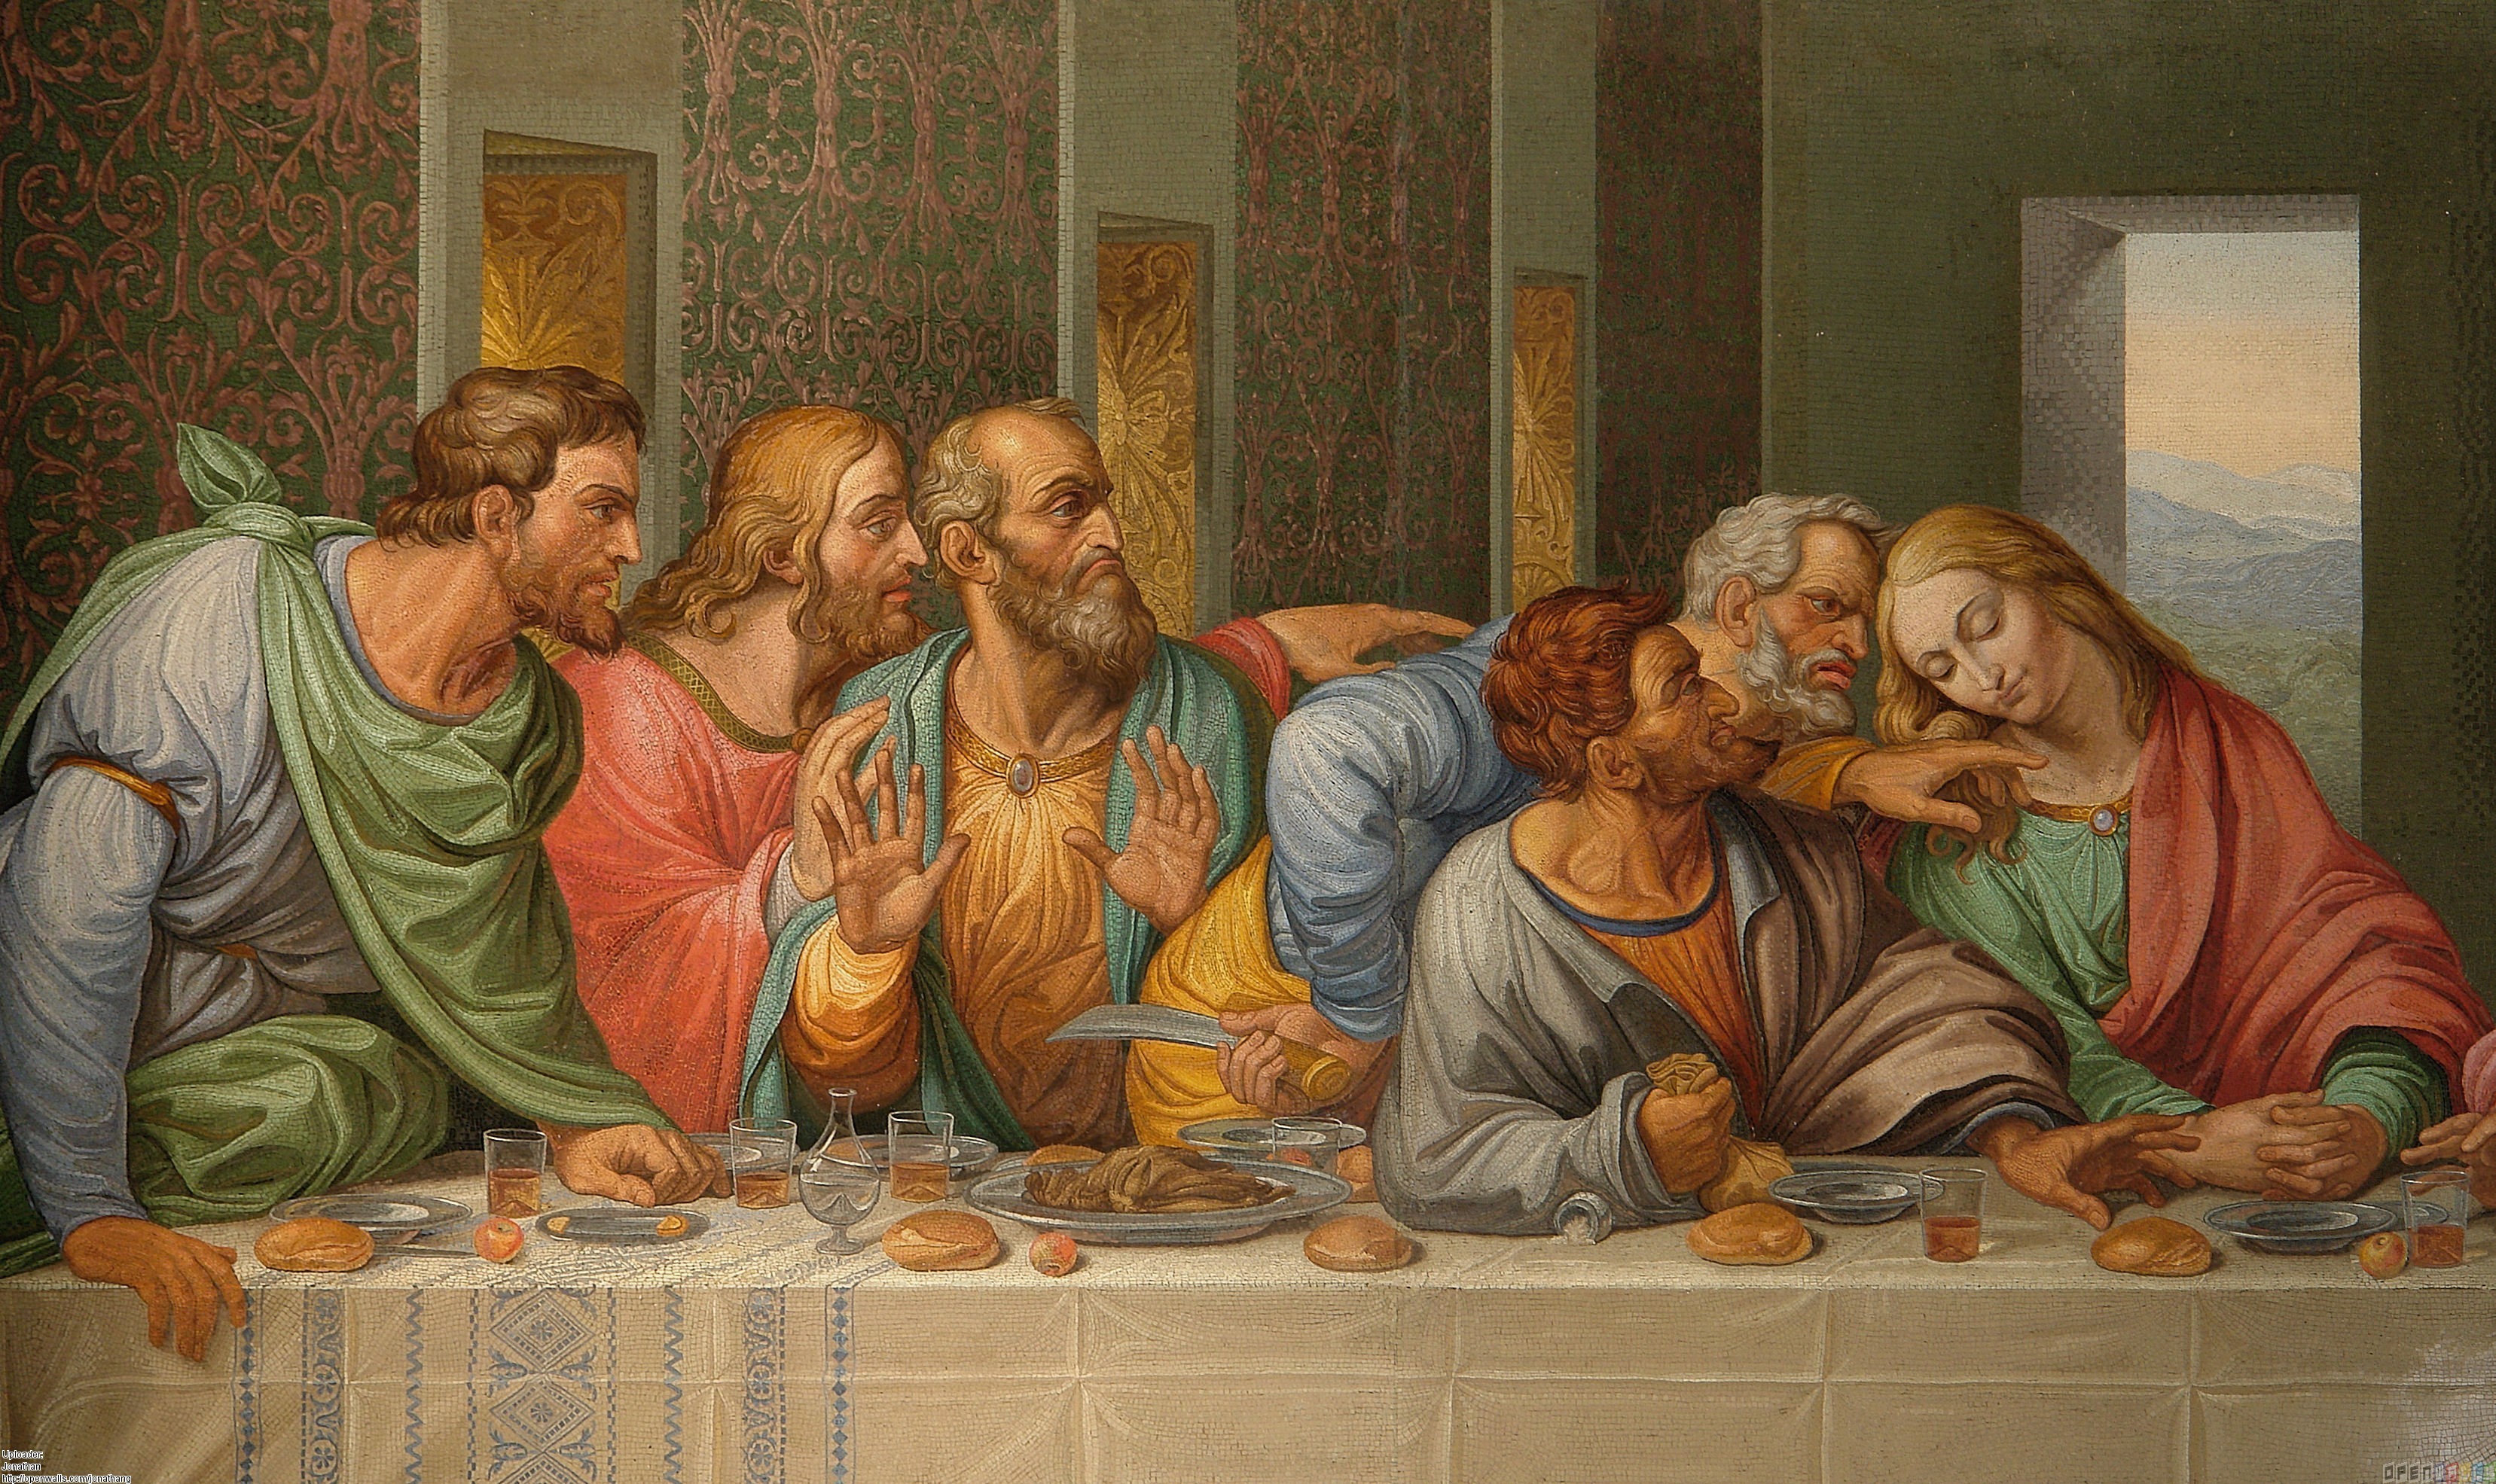 3314x1971 HD Wallpaper of Inspiring The Last Supper Hd Desktop Wallpapers Background,  Desktop Wallpaper Inspiring The